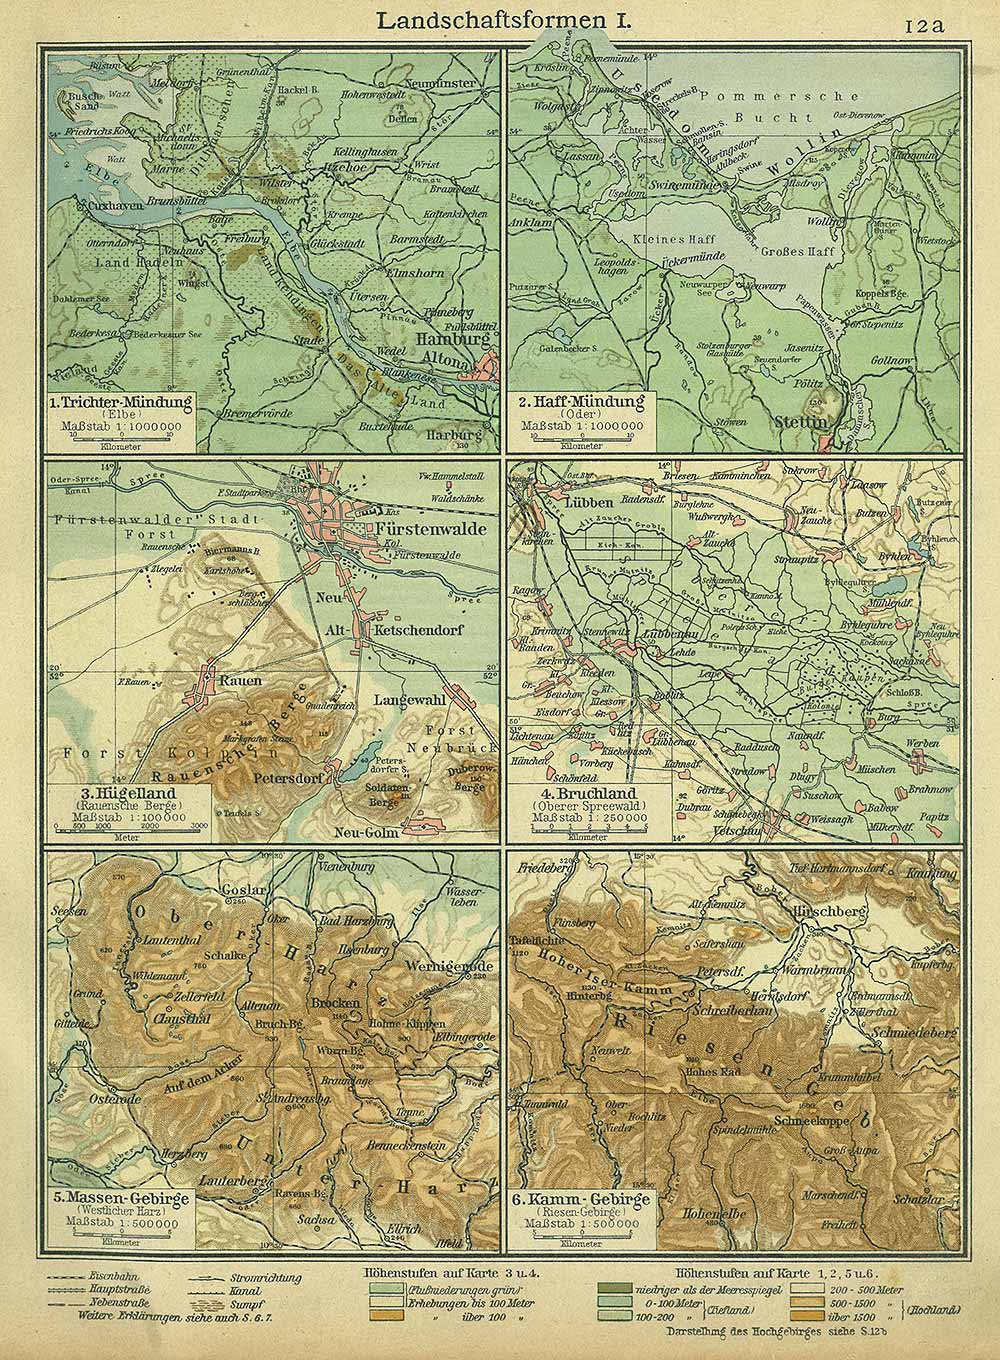 Landscape forms of Germany 1, Andrees 'Berliner Schul-Atlas', 1916, page 12a, published size to print borders 19.55 cm wide by 27.74 cm high.